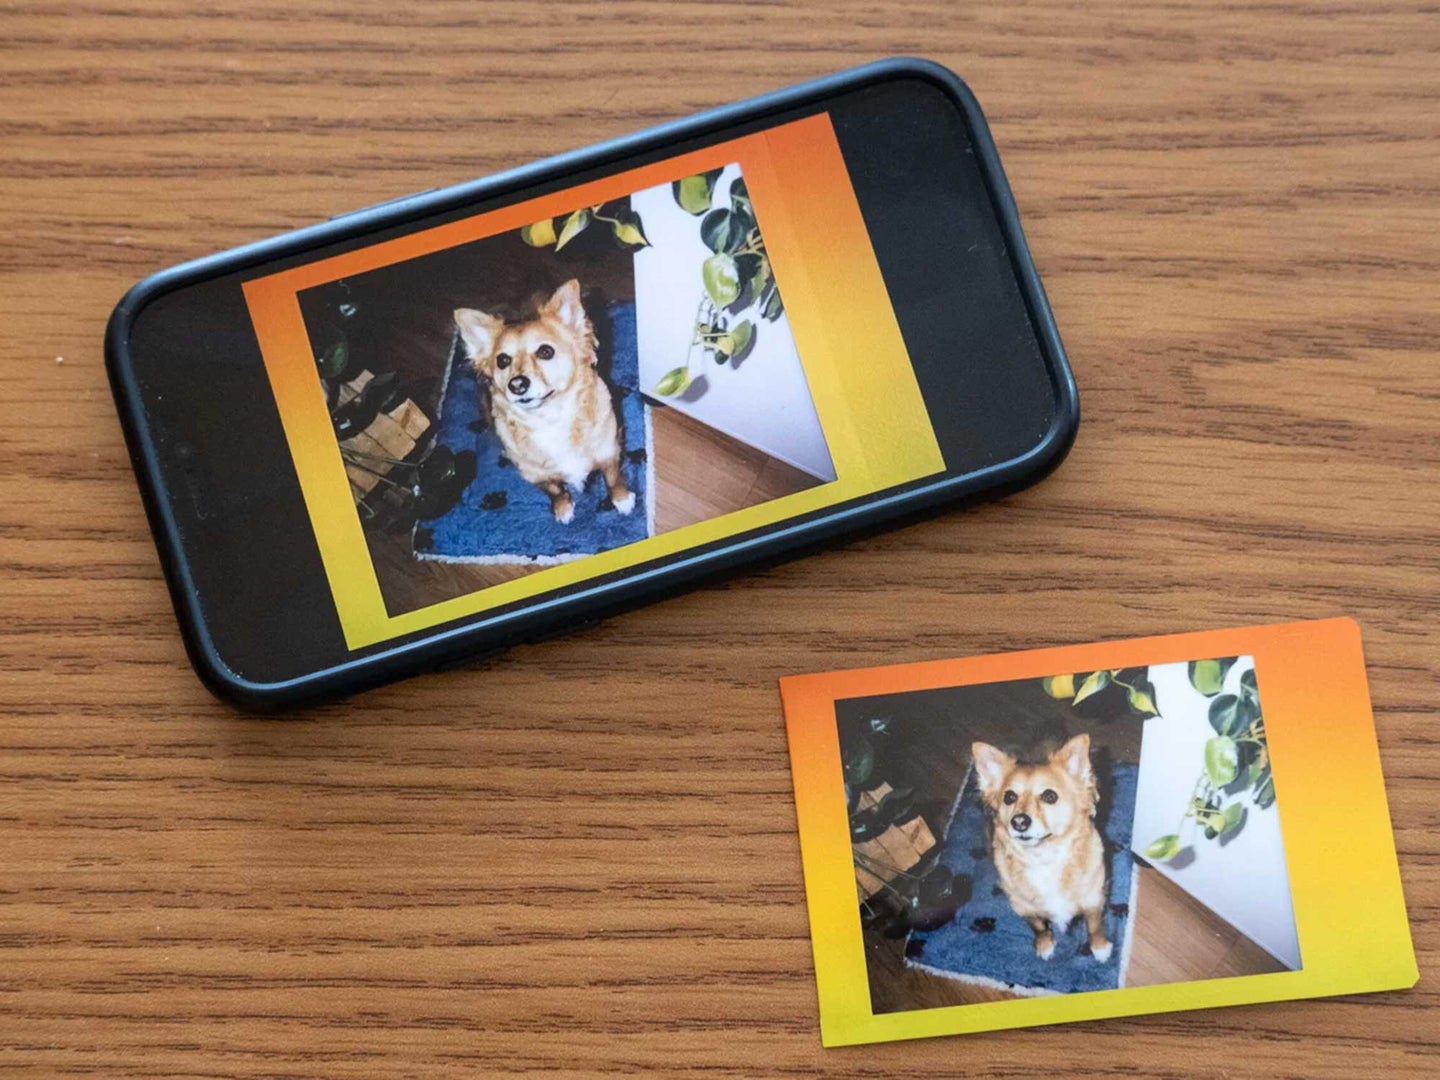 Image of an app that digitizes photos.